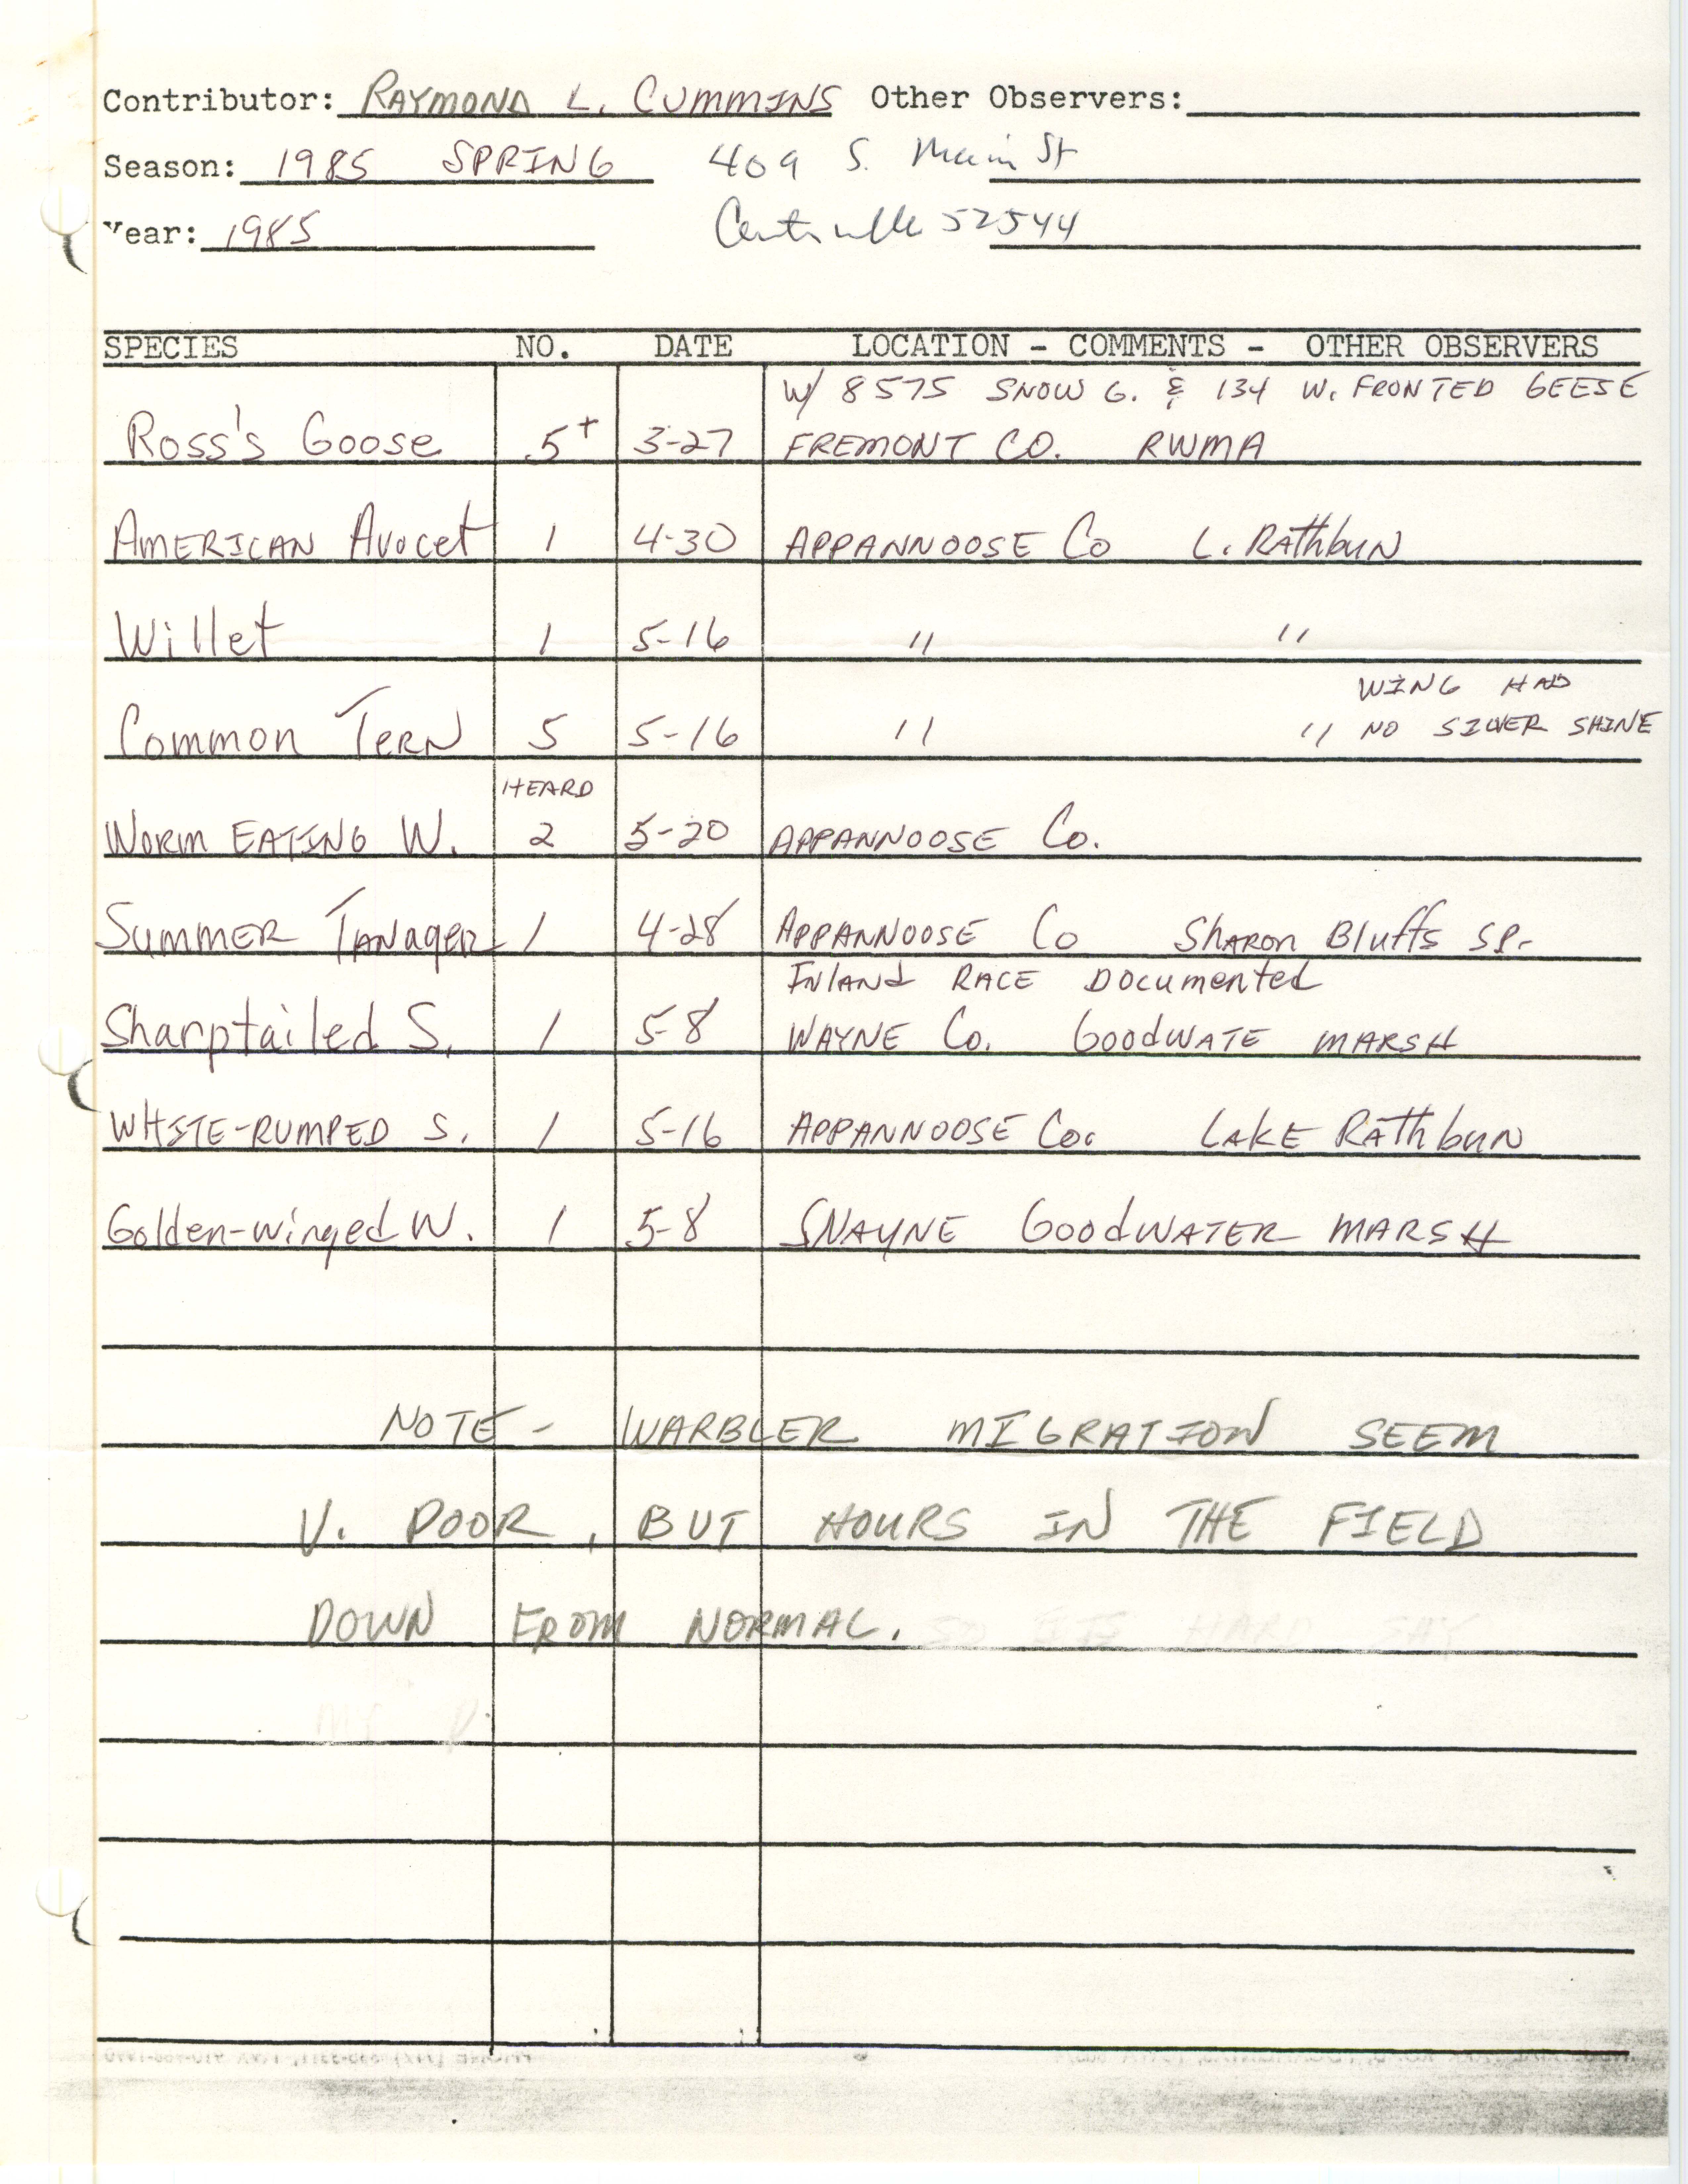 Field notes contributed by Raymond L. Cummins, spring 1985